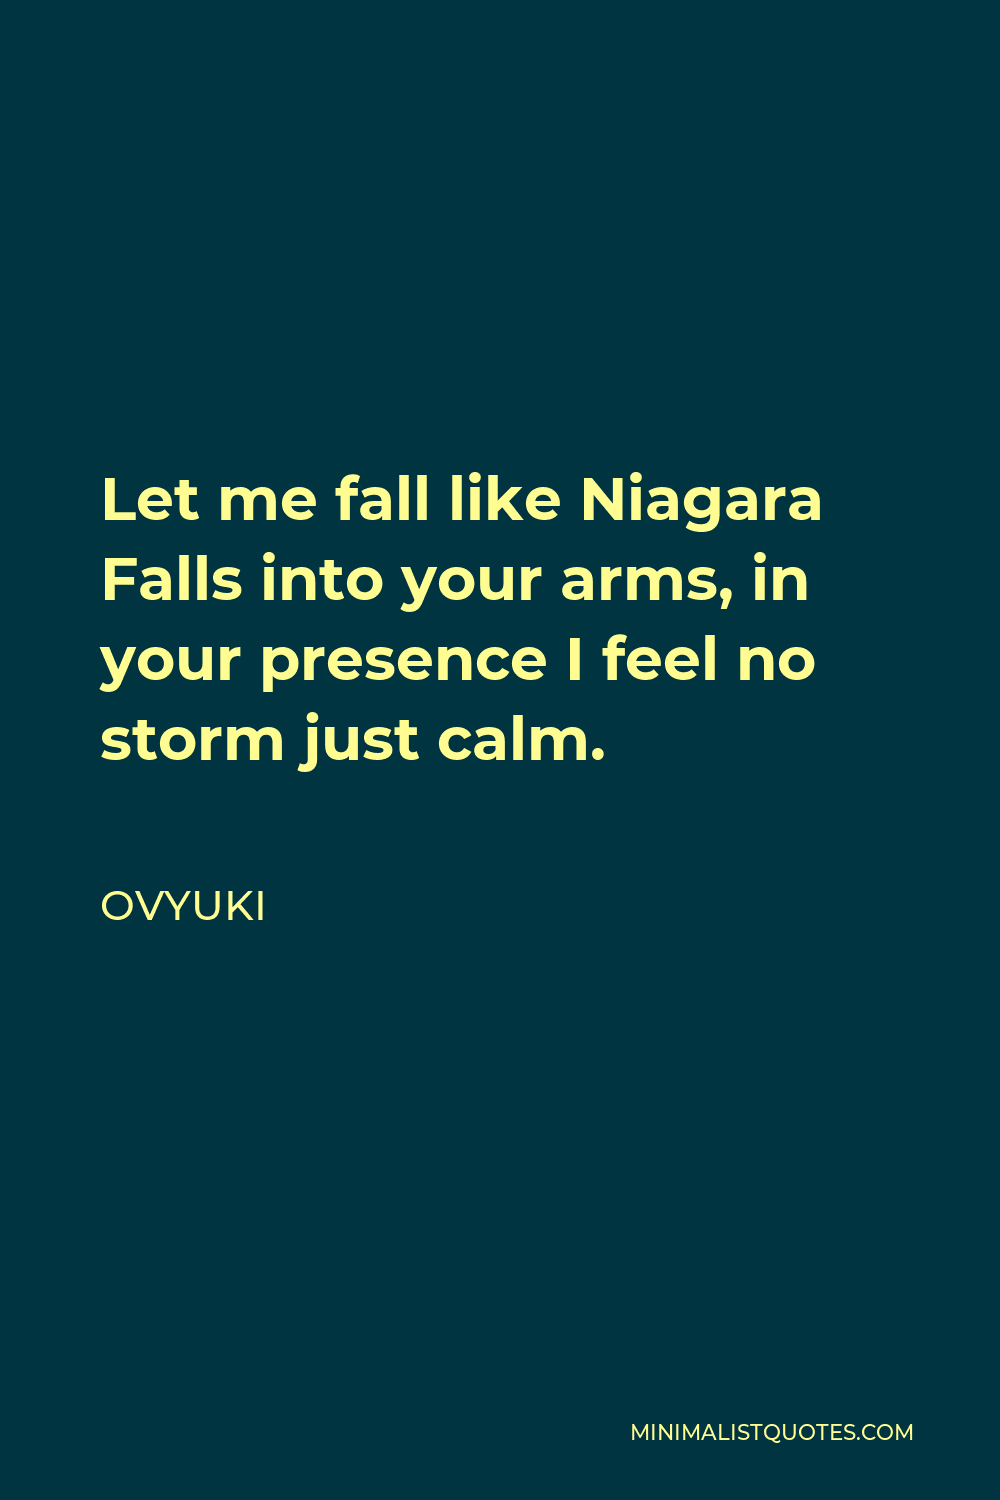 Ovyuki Quote - Let me fall like Niagara Falls into your arms, in your presence I feel no storm just calm.